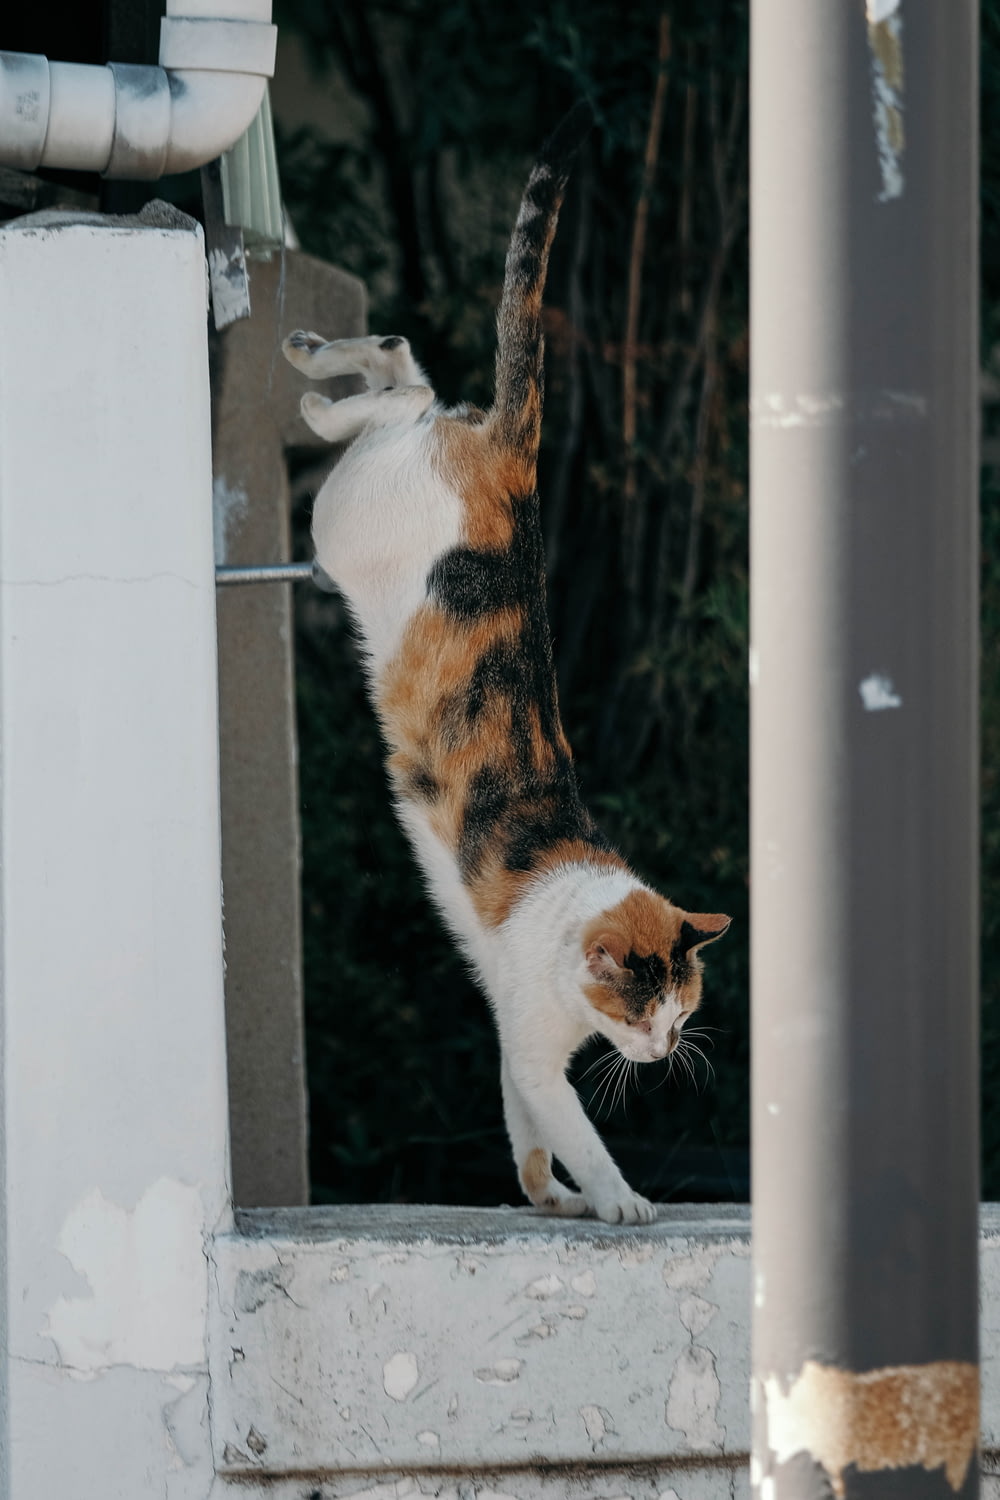 a cat standing on its hind legs on a ledge